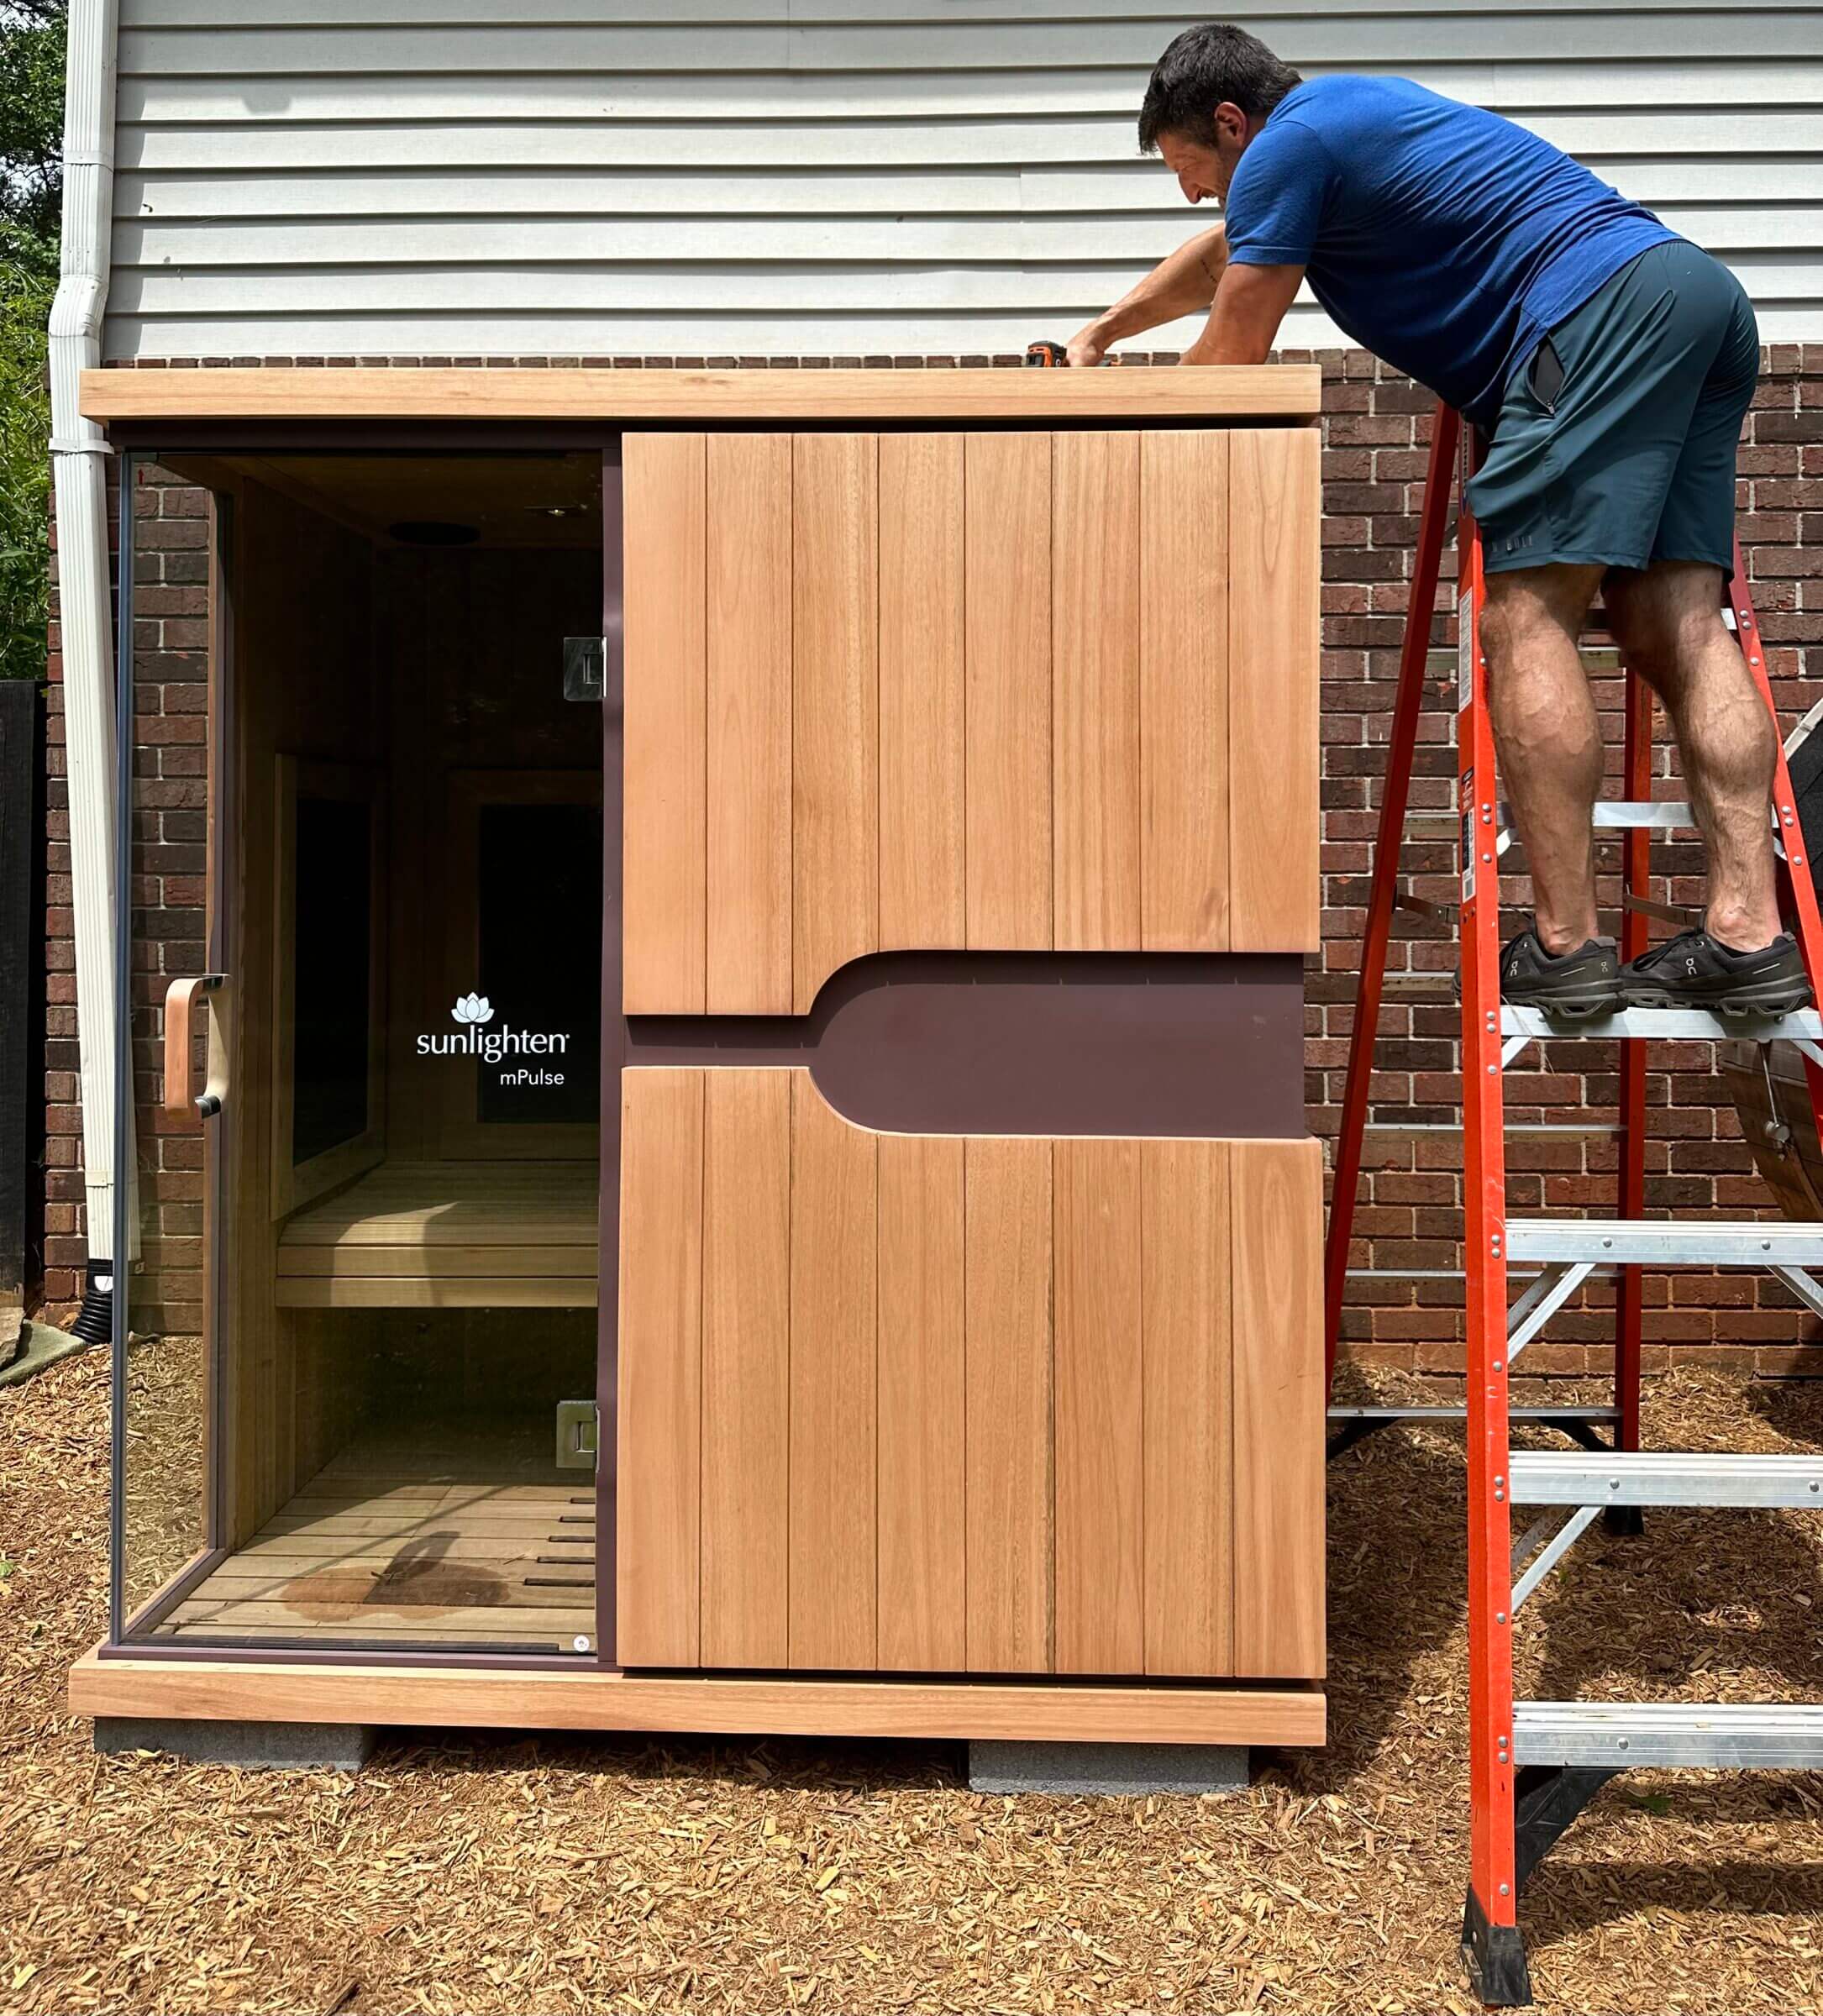 Here I am finishing up the assembly of our walk-in infrared sauna.